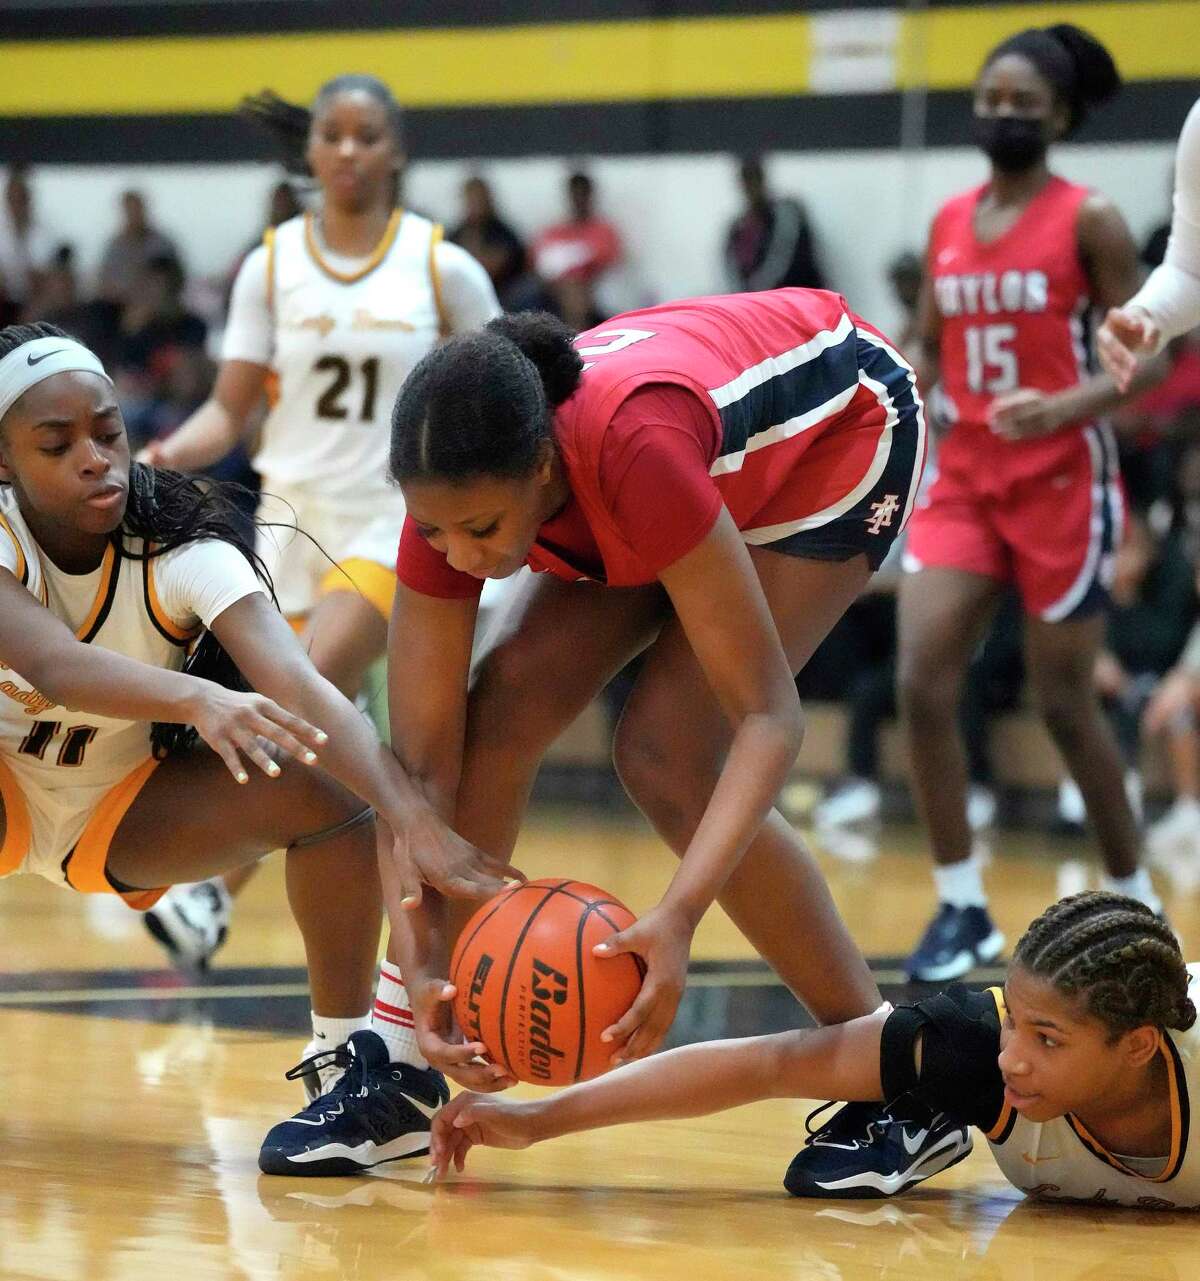 Alief Taylor's Nataliyah Gray (22) tries to hang onto the ball against Hasting High School's Domitila Amugu (11) and her teammate Melinda Winston (23) during the second half of a District 23-6A girls basketball game at Hastings High School on Saturday, Jan. 7, 2023 in Houston. Hasting High School won the game 52-45 against Alief Taylor.